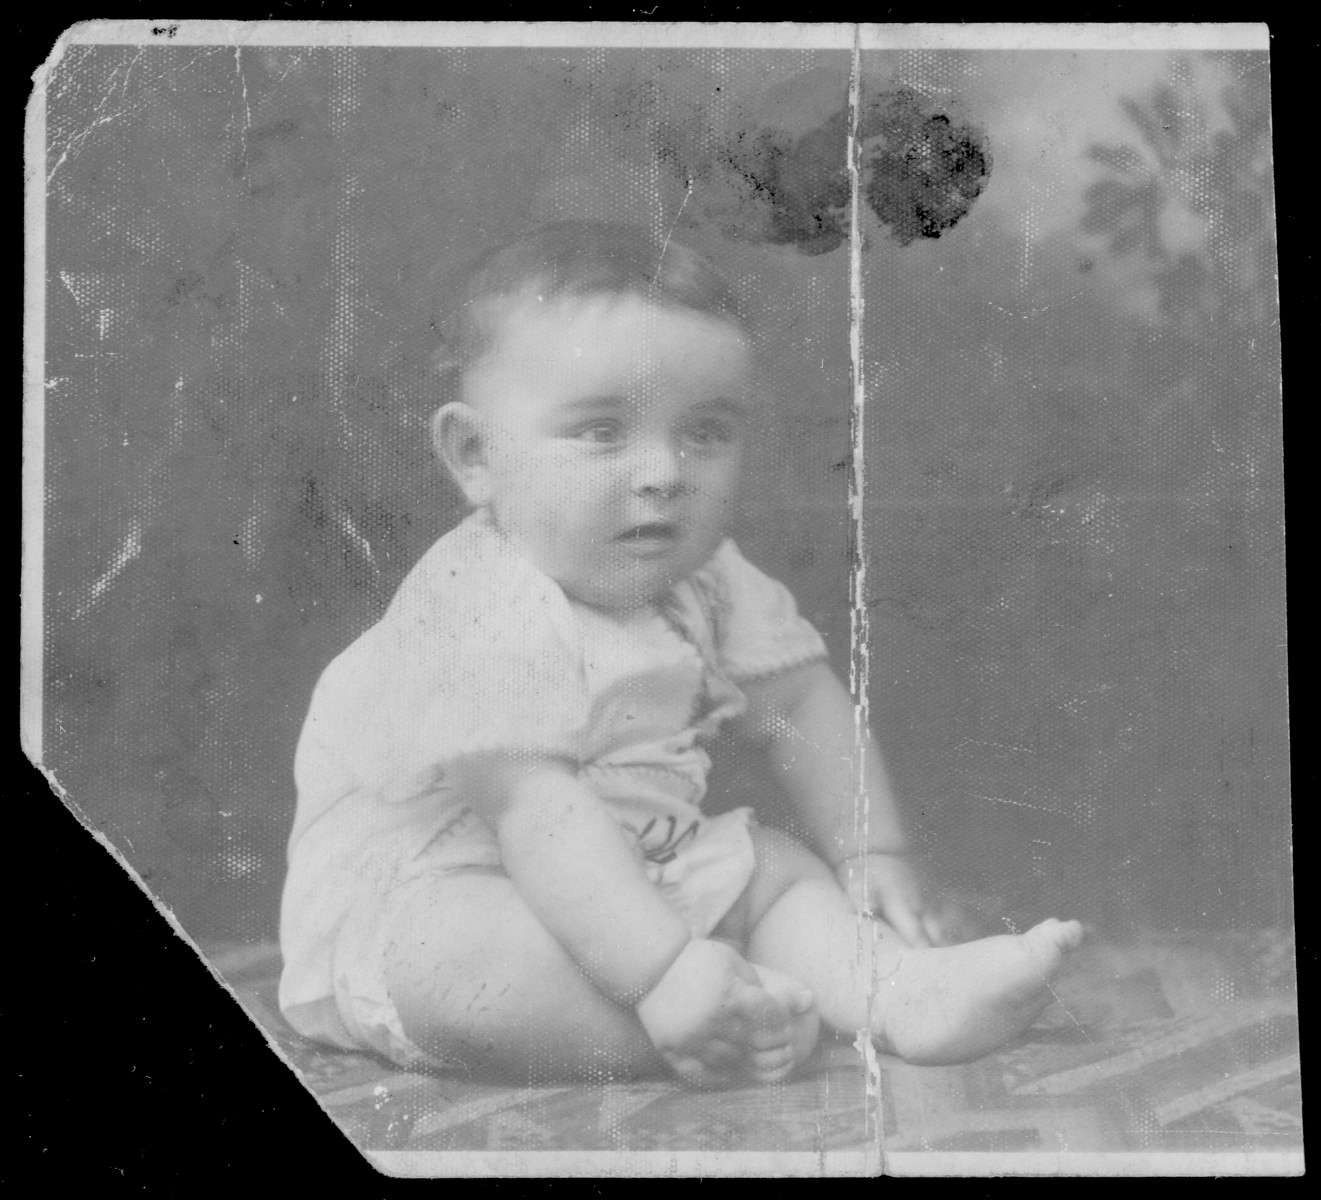 Portrait of Chaim Lehman, the donor's nephew.  

Chaim was deported to Auschwitz with his mother Basia and sister Miriam in August 1942.  They all perished.